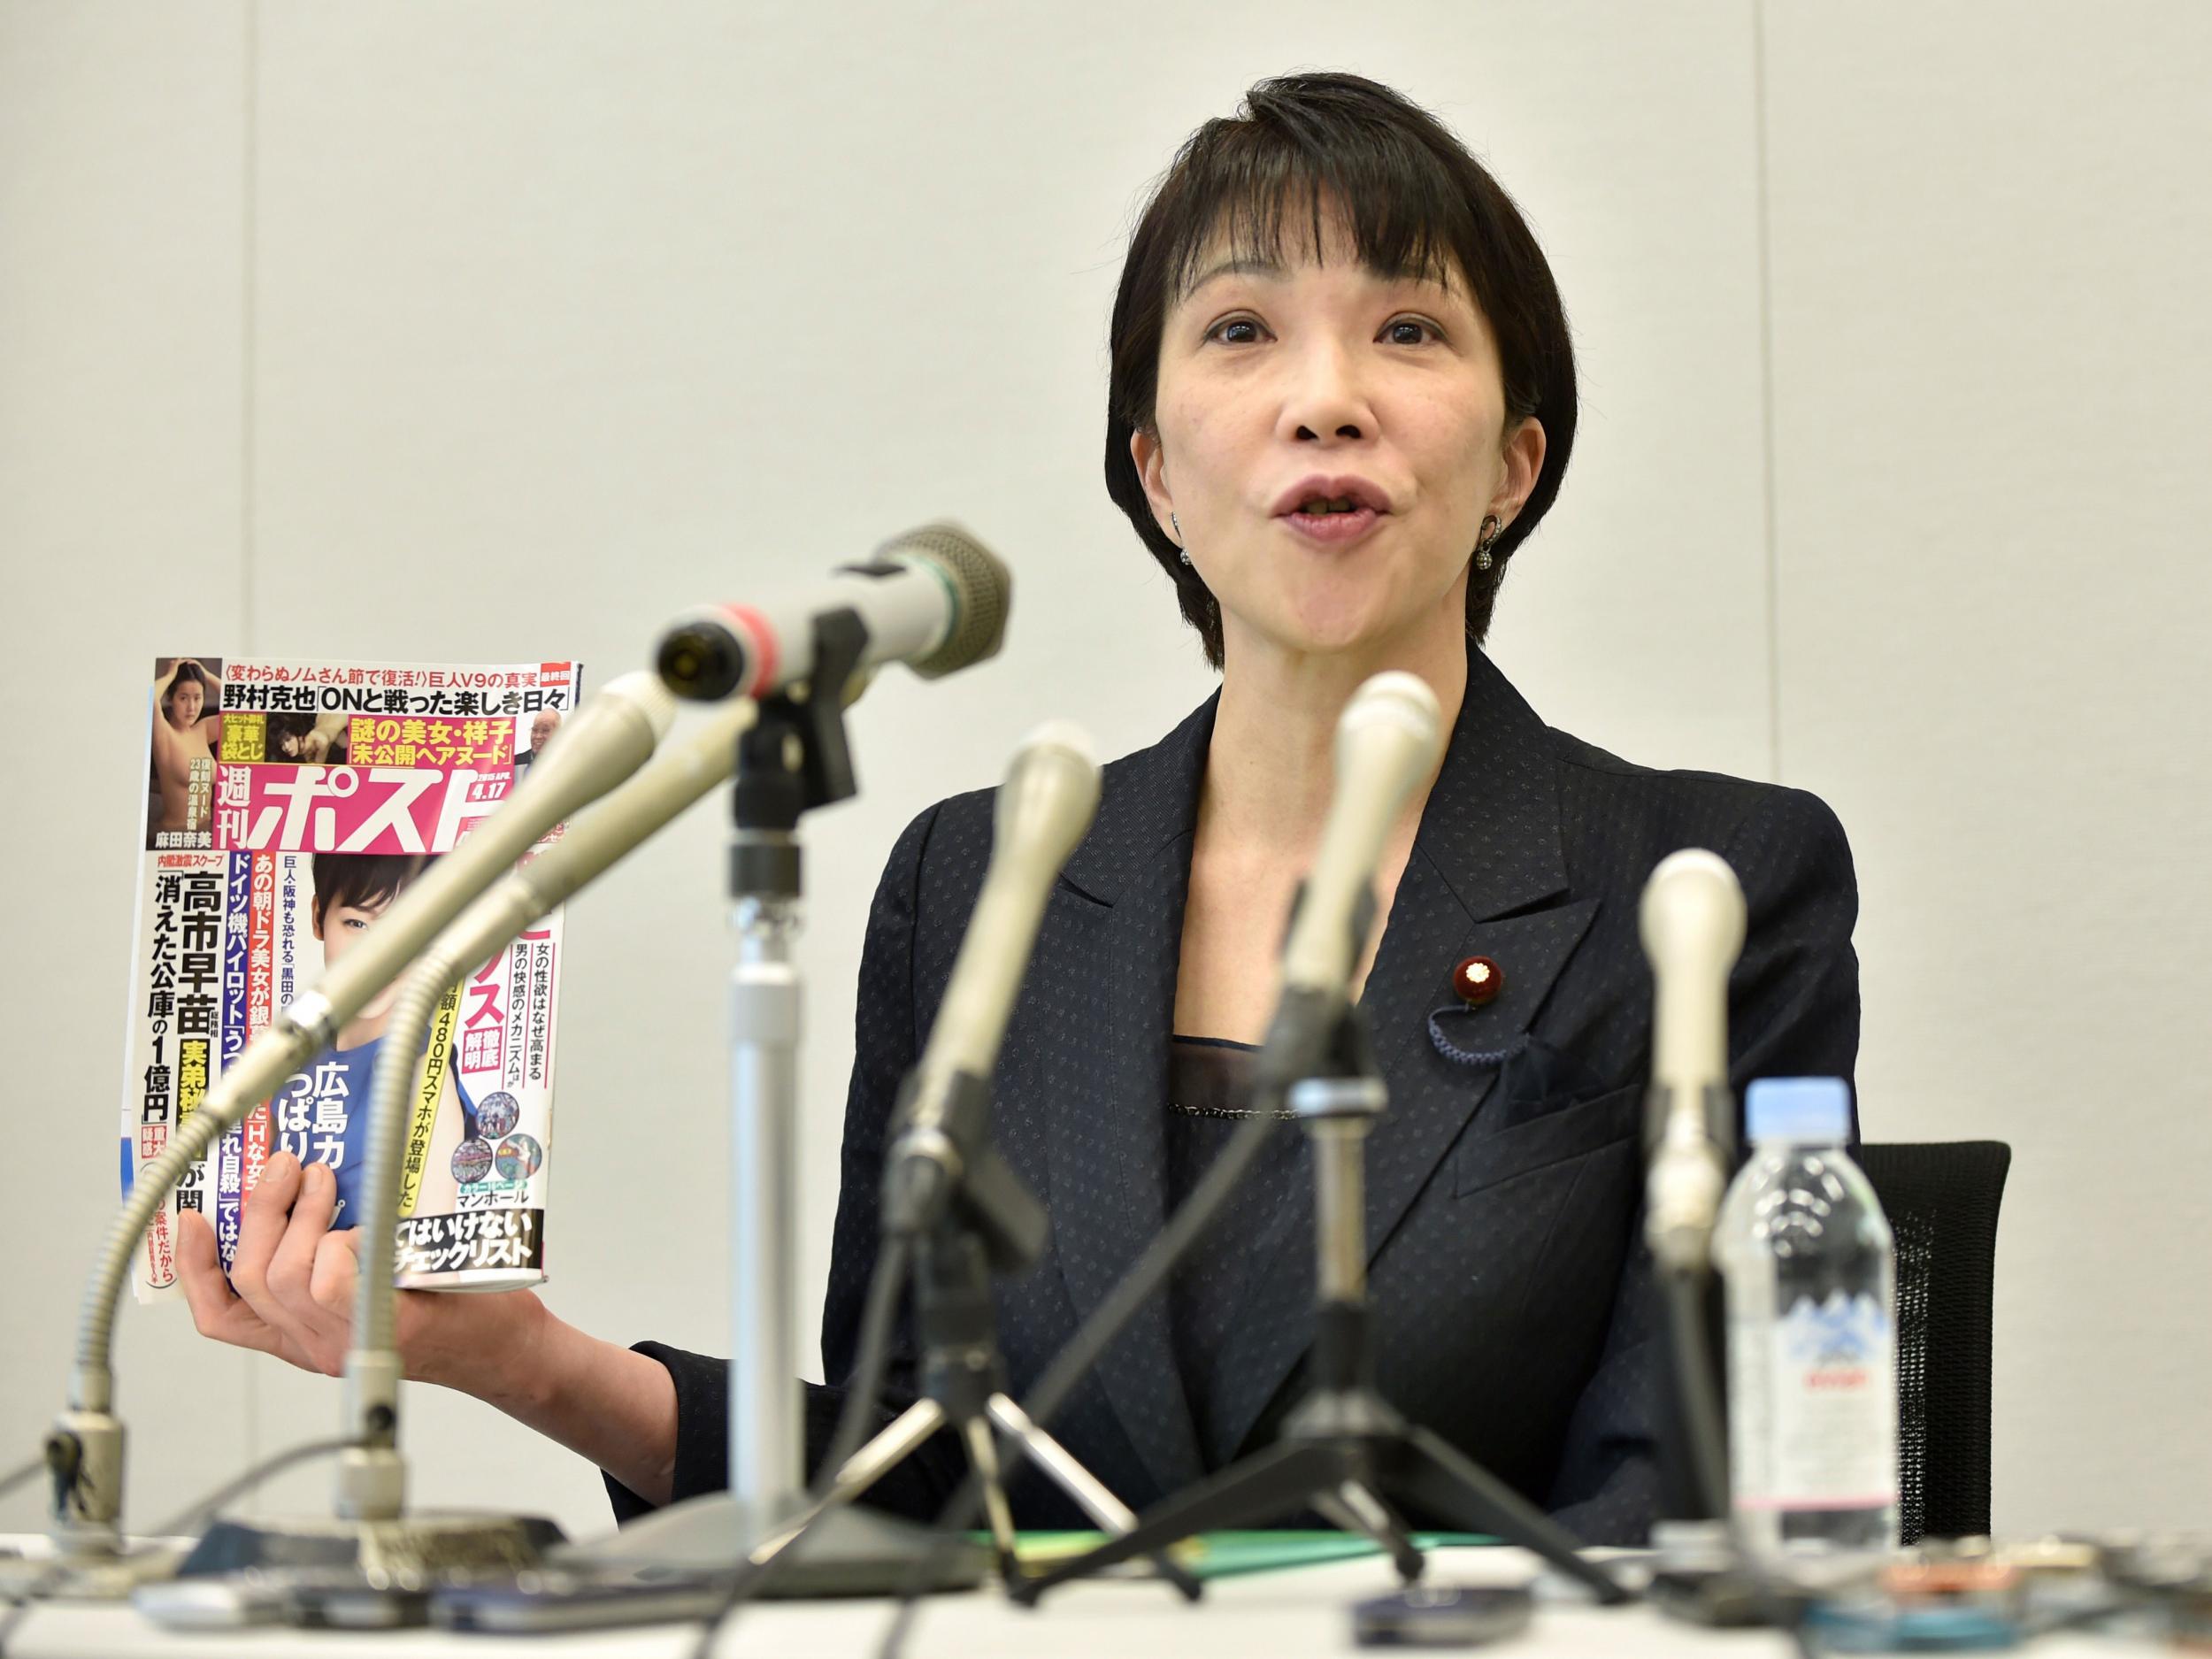 Japanese News Anchors Sacked As Press Freedom Tightens Asia News